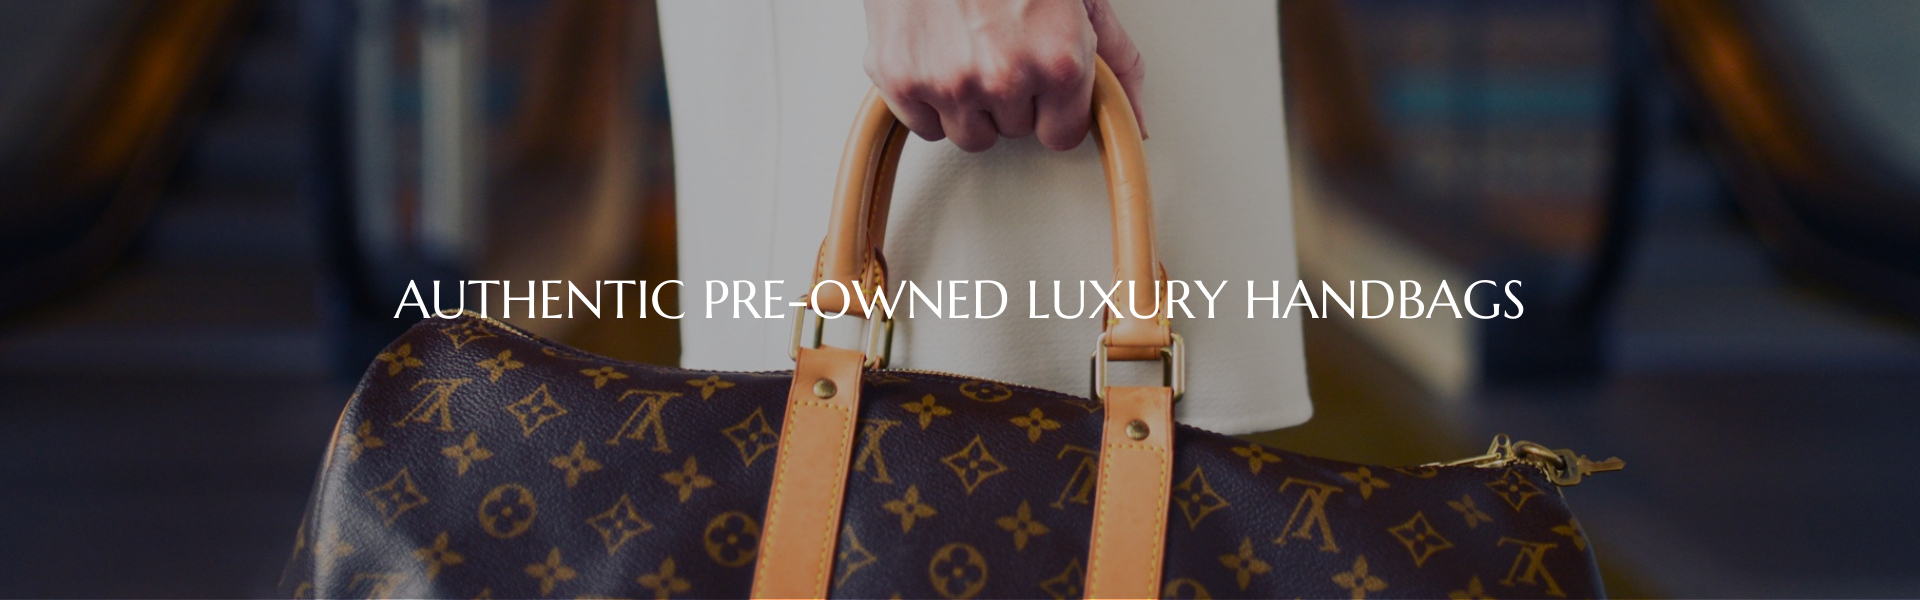 Louis Vuitton Favorite Clutch Bags for Women, Authenticity Guaranteed